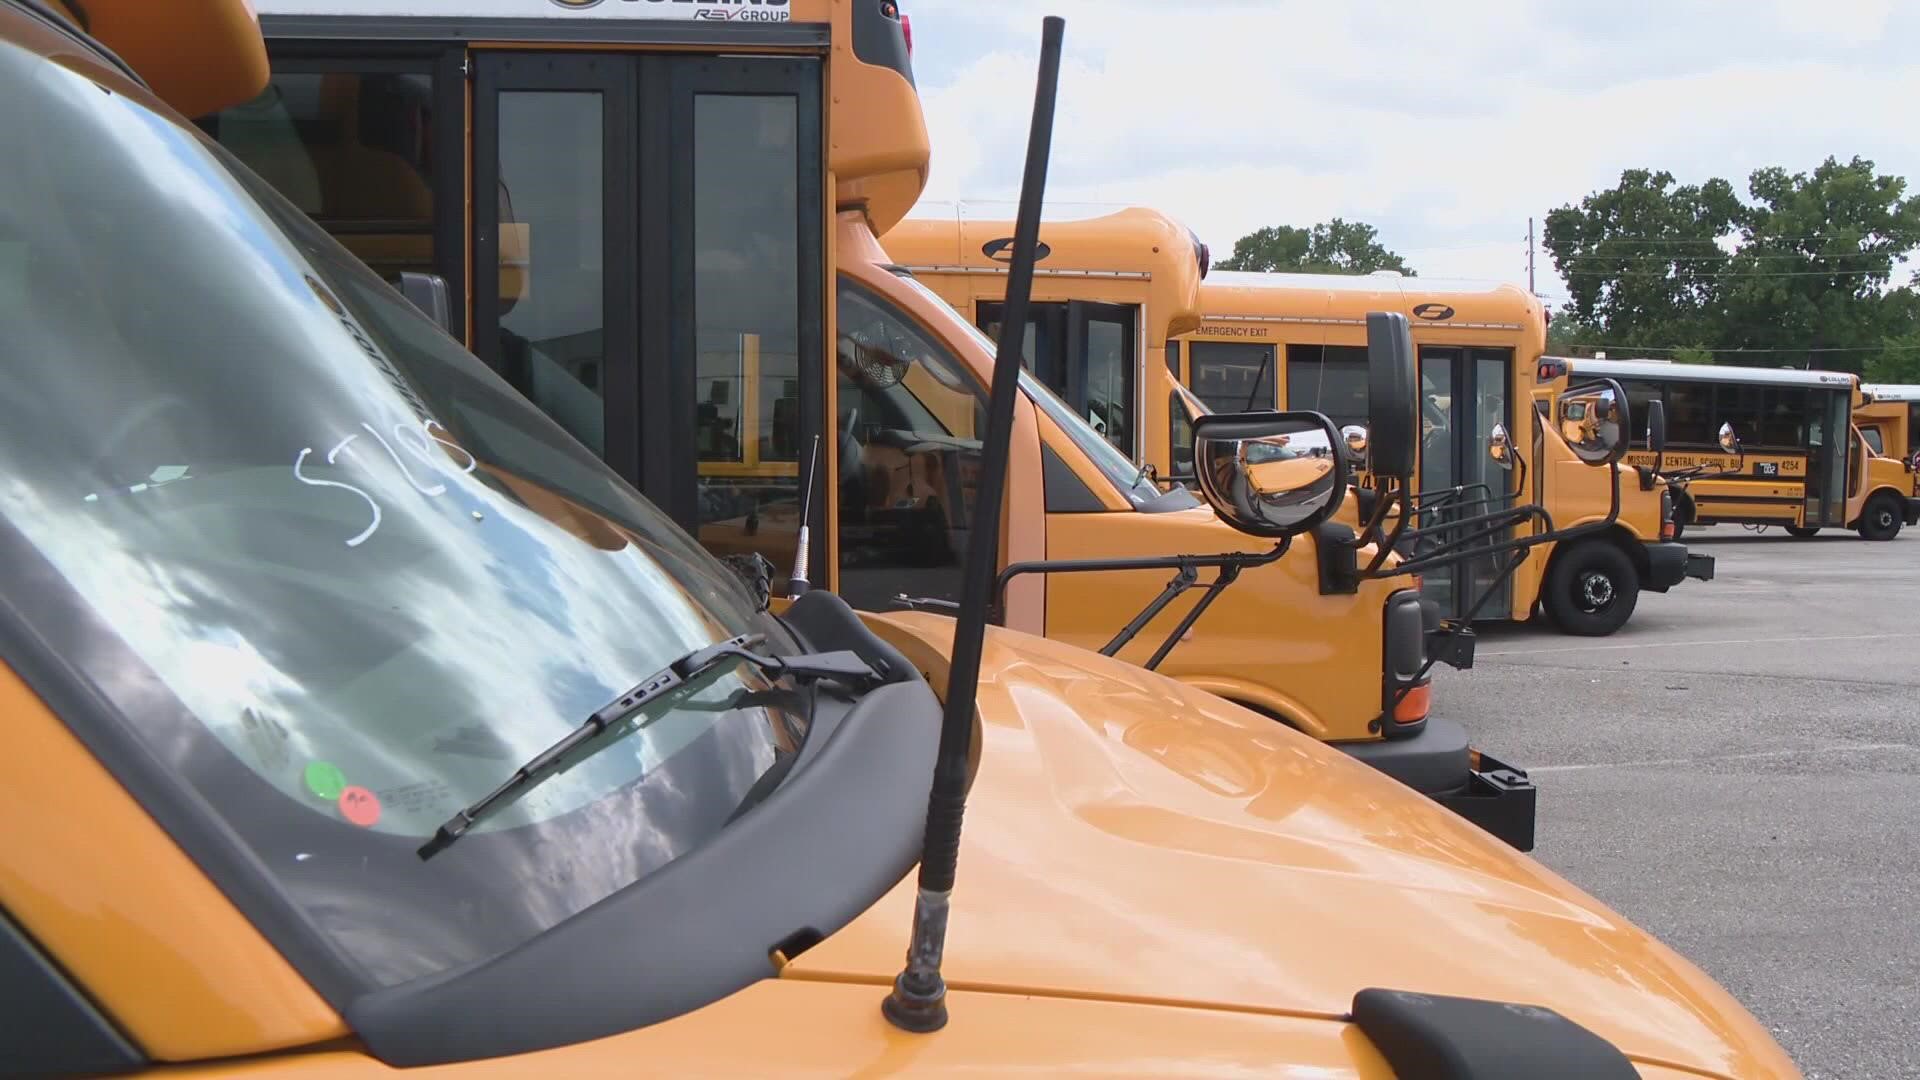 Starting Oct. 3, students at more than a dozen schools will be dismissed 10 minutes earlier  to allow the district to have additional bus routes.